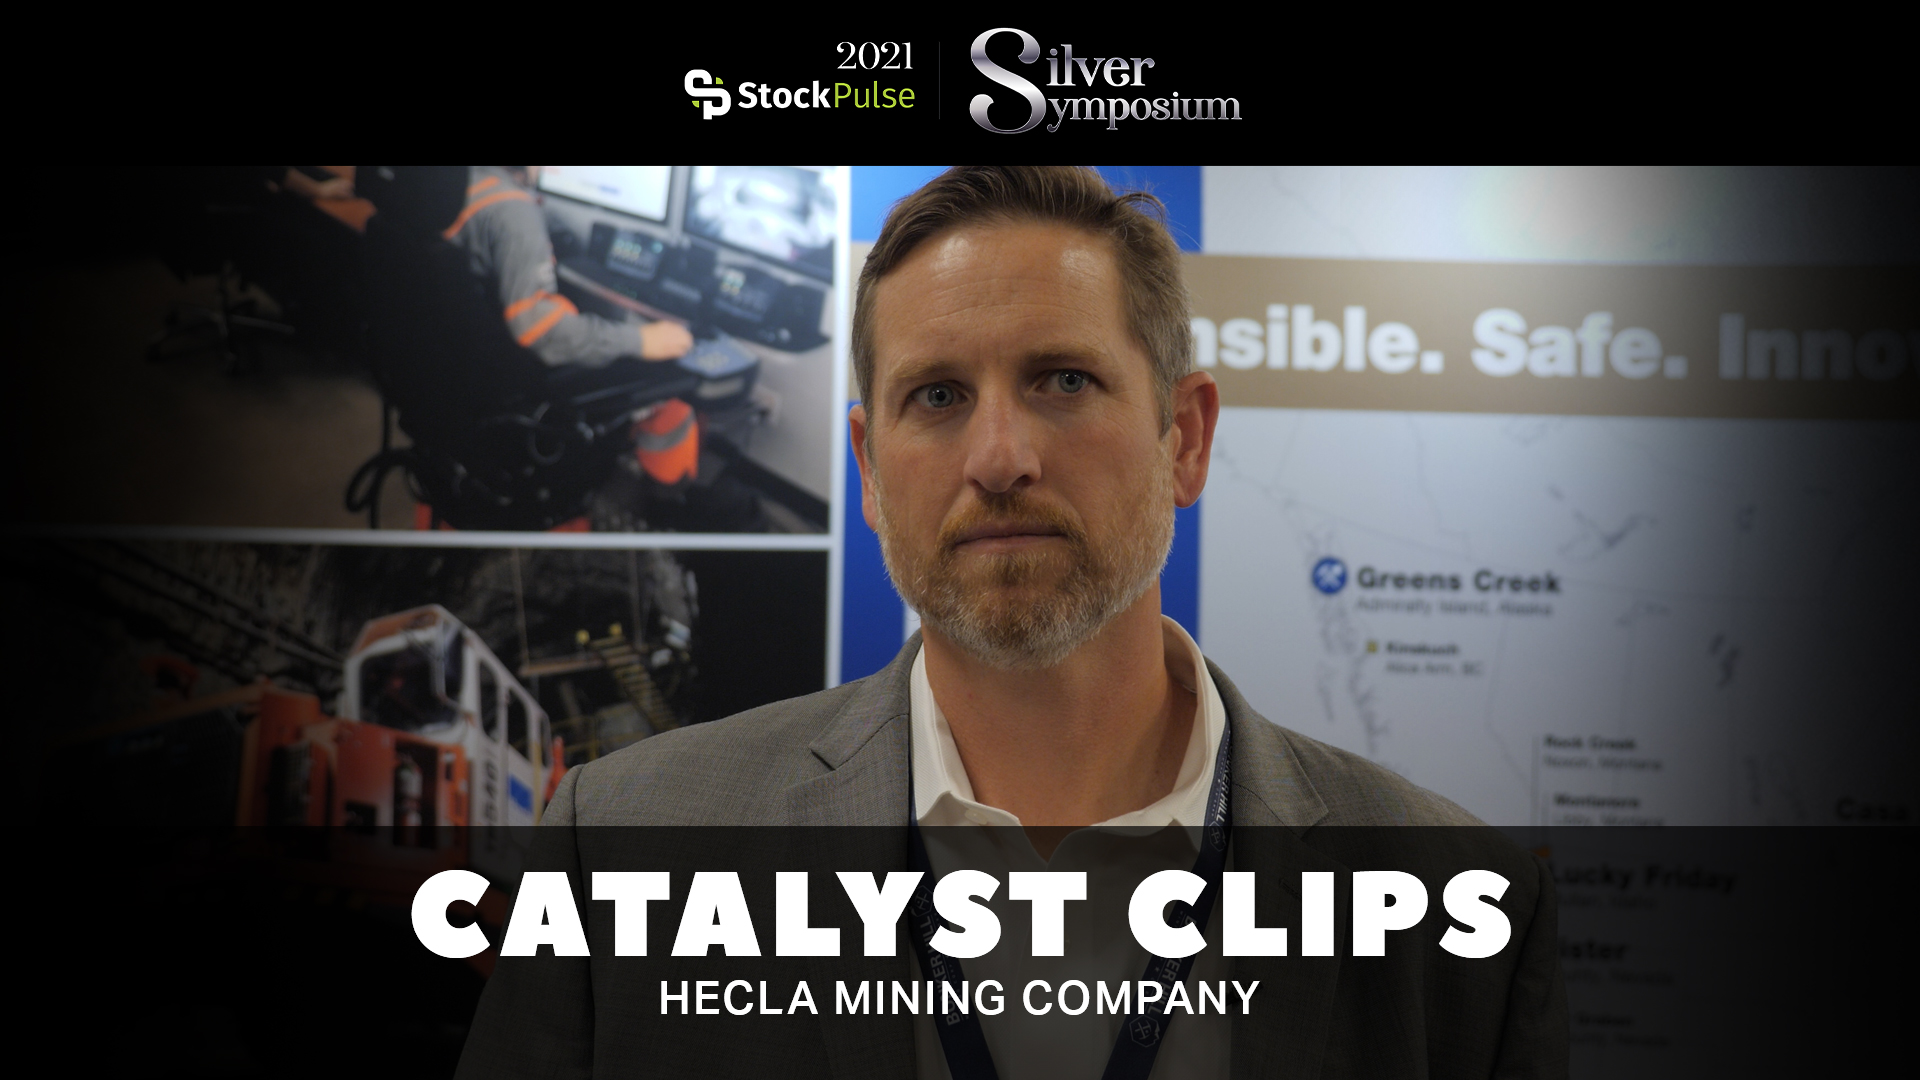 2021 StockPulse Silver Symposium Catalyst Clips | Russell Lawlar of Hecla Mining Company